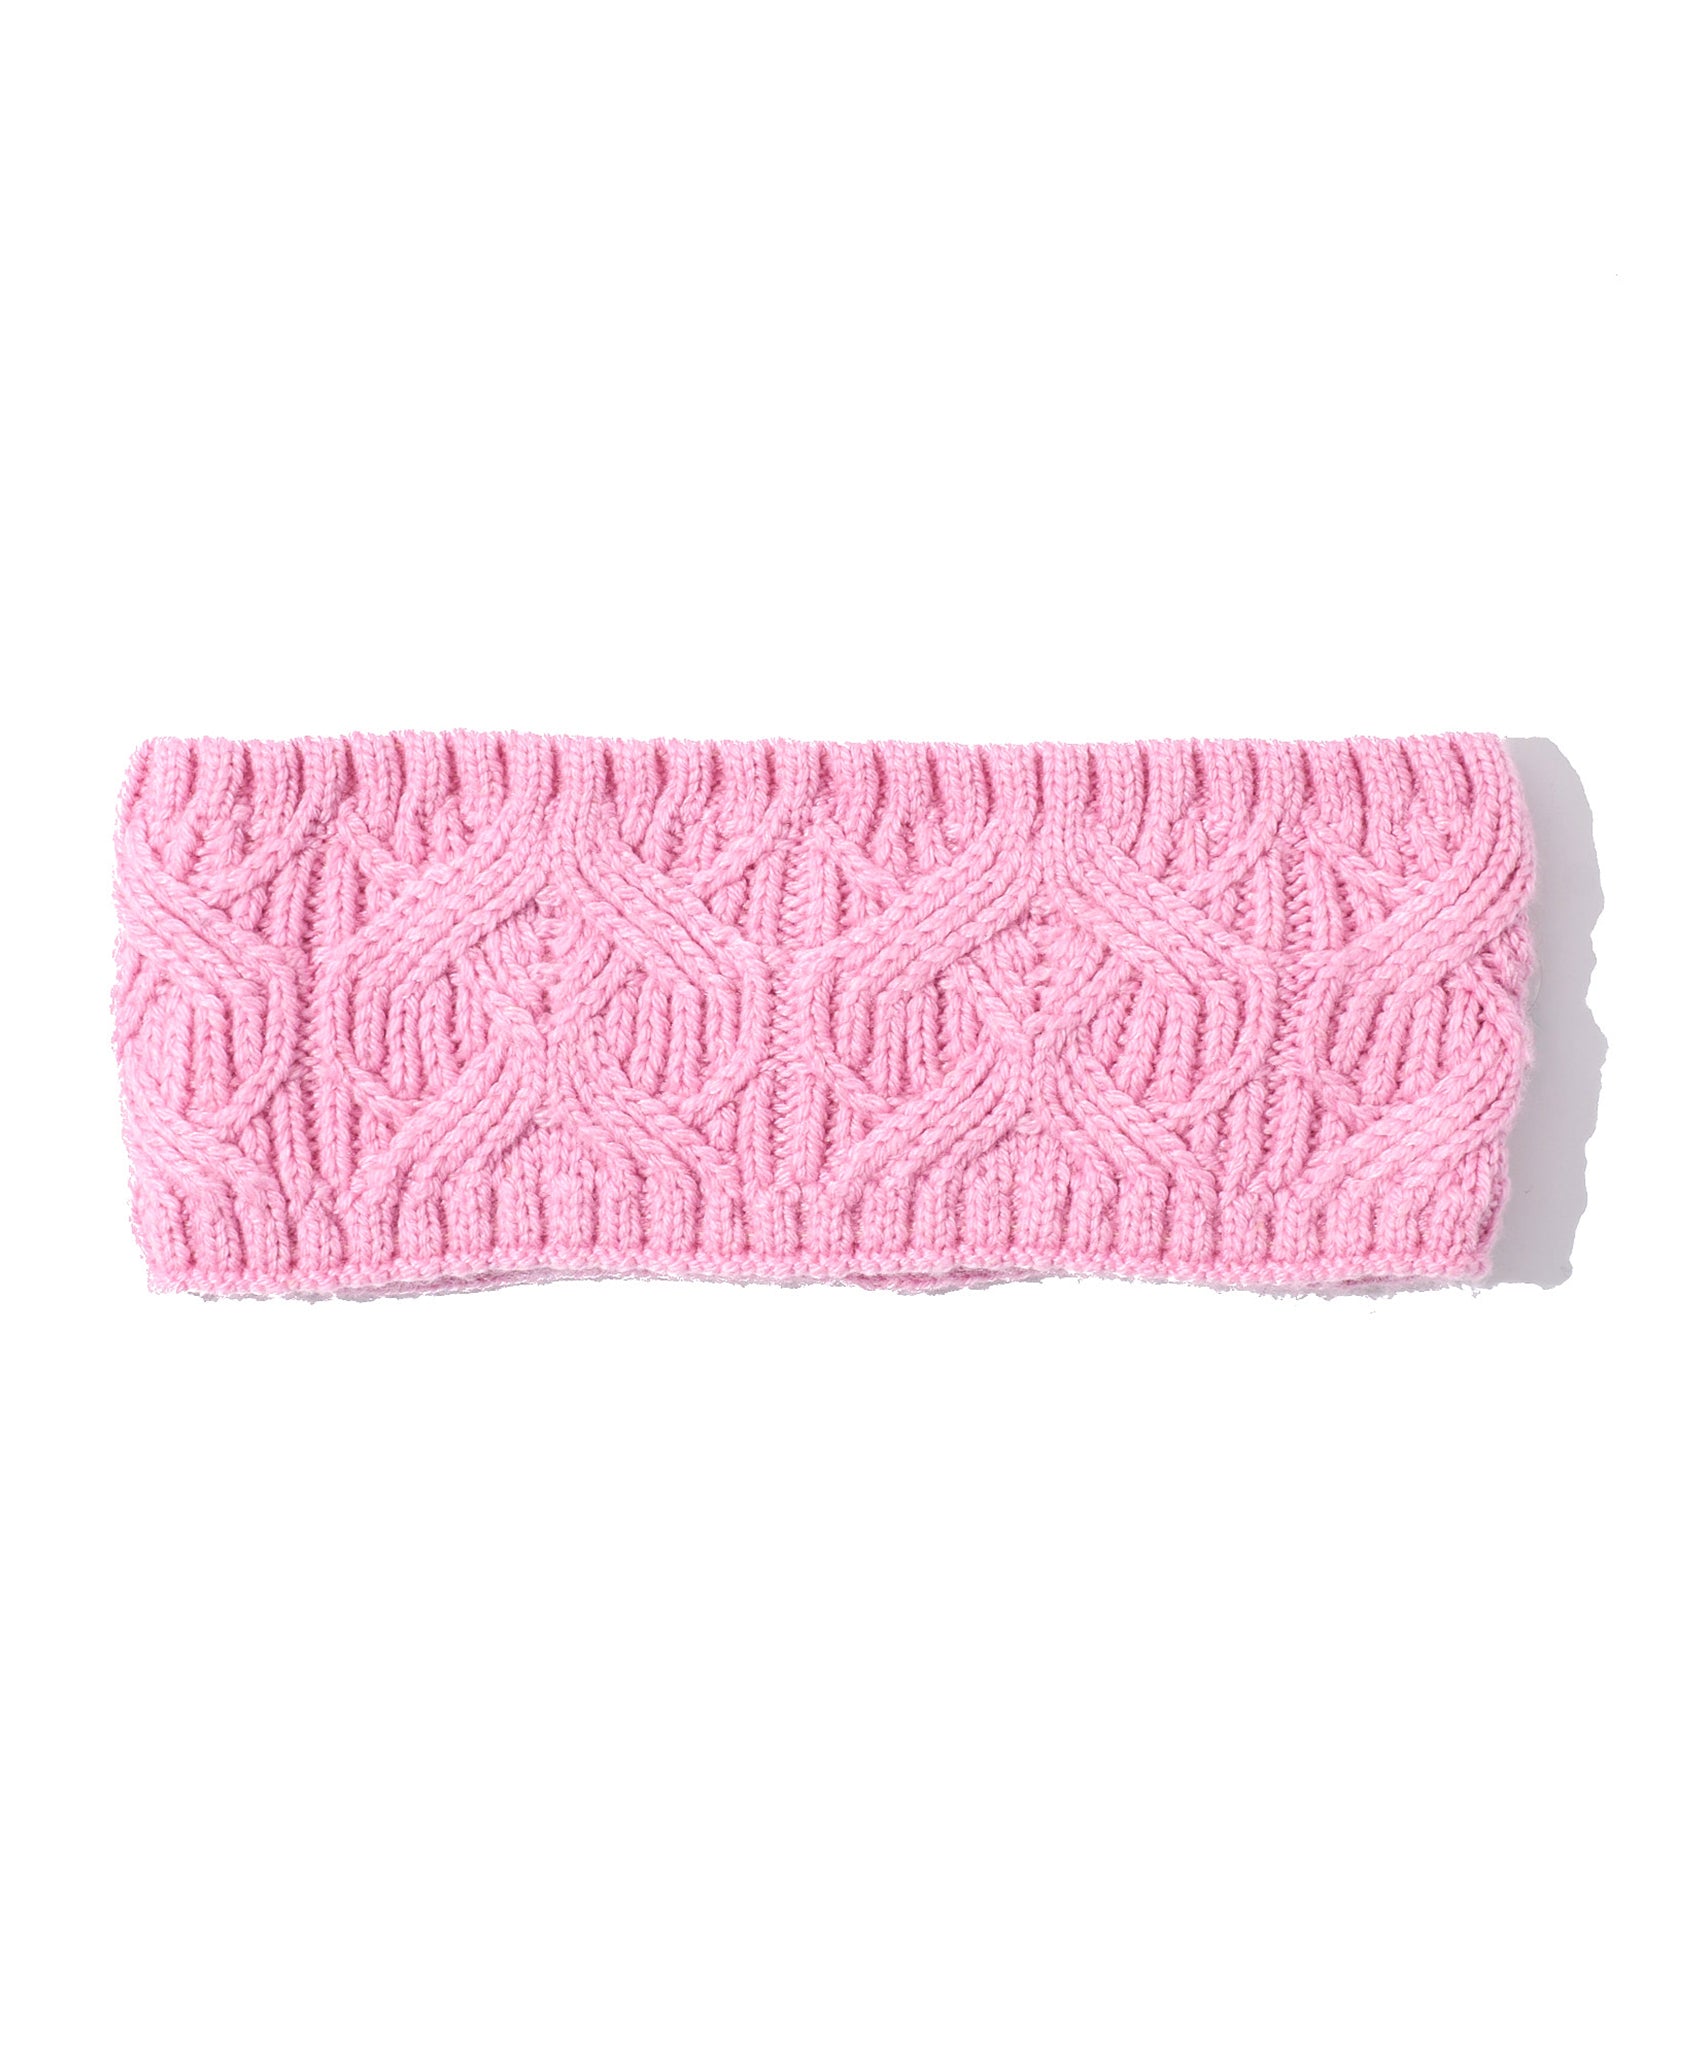 Loopy Cable Headband in color Candy Pink